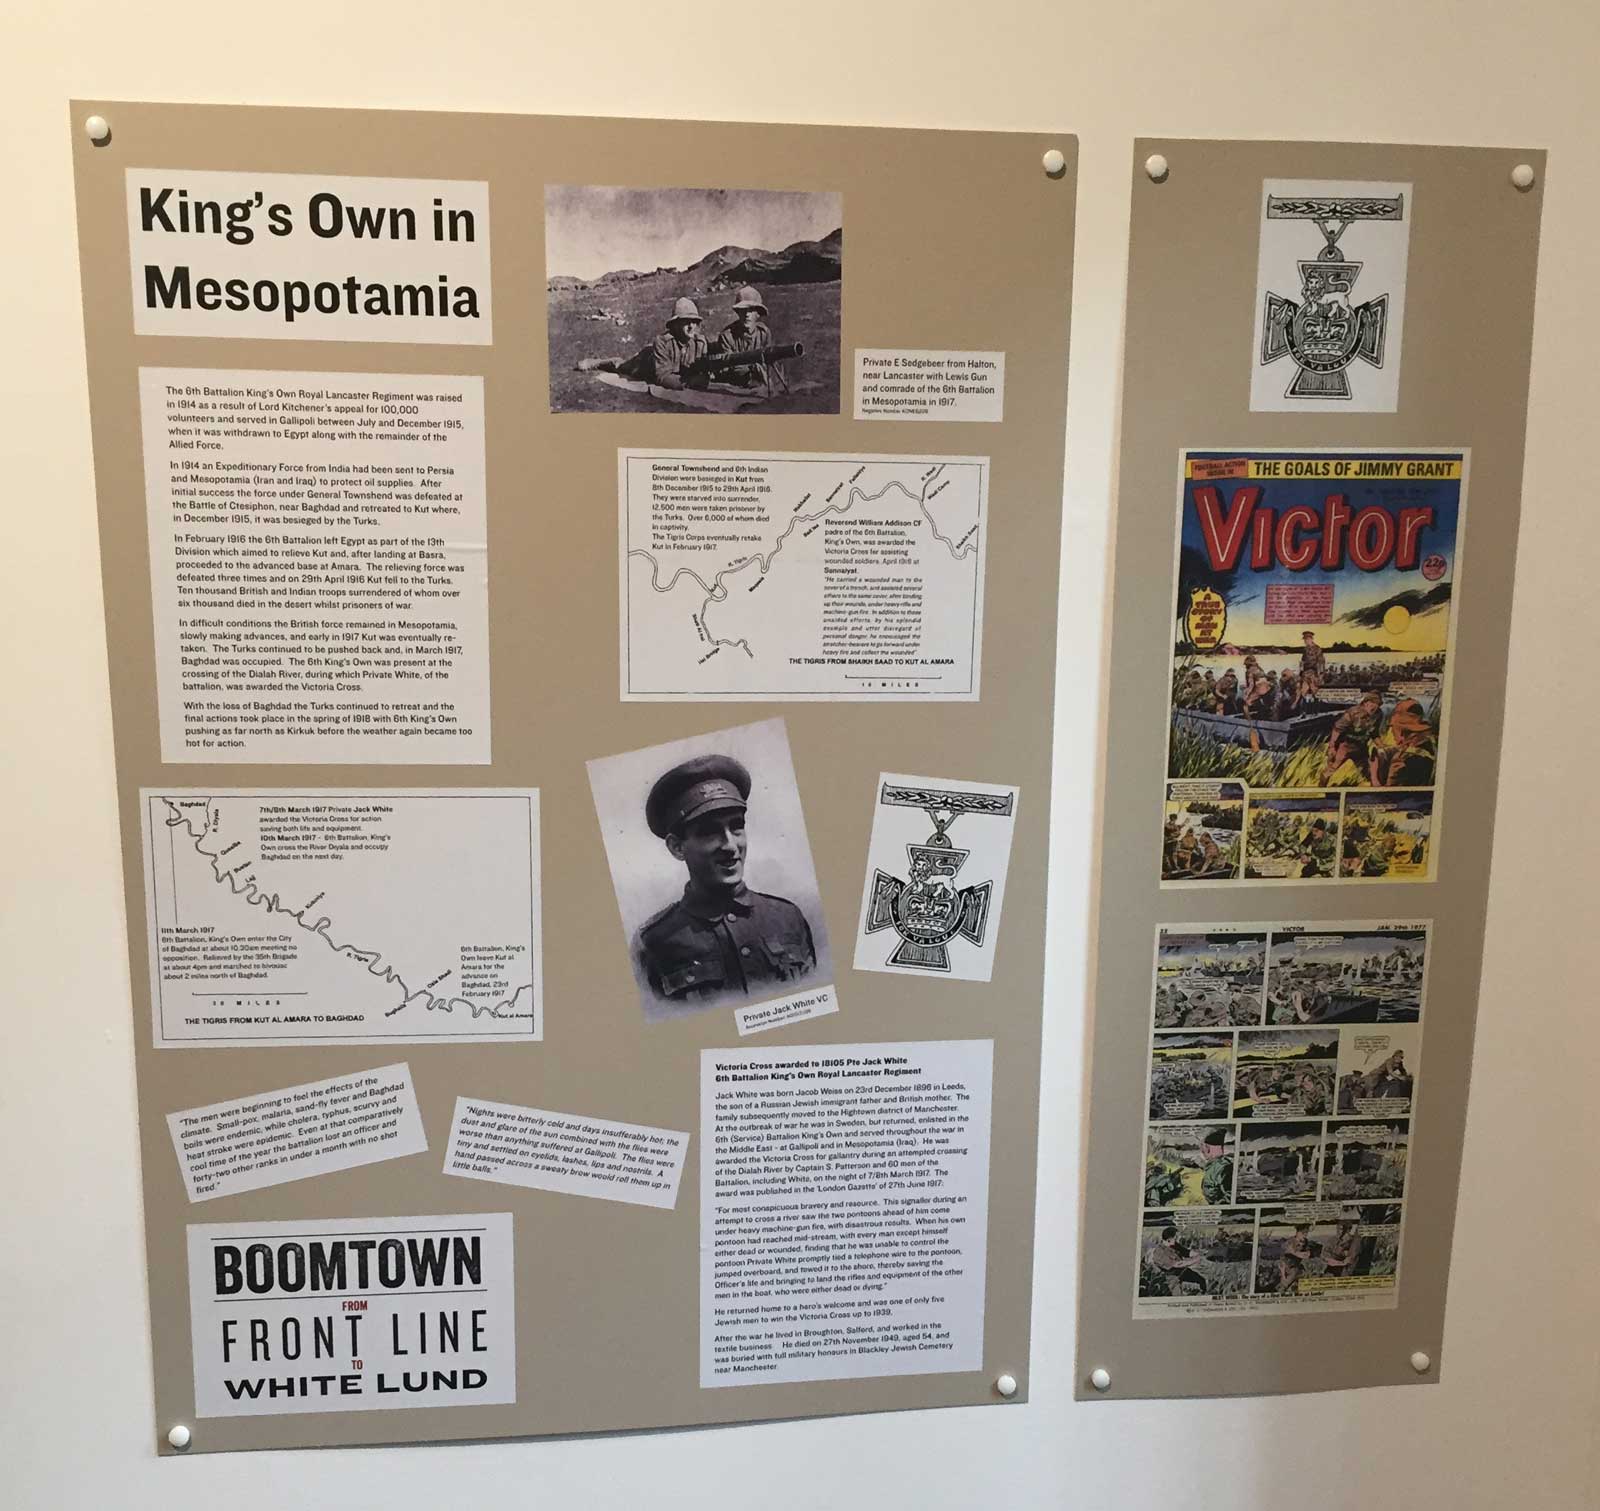 The display board at the "Boom Town" featuring Victoria Cross winner Jack White and Victor 1358